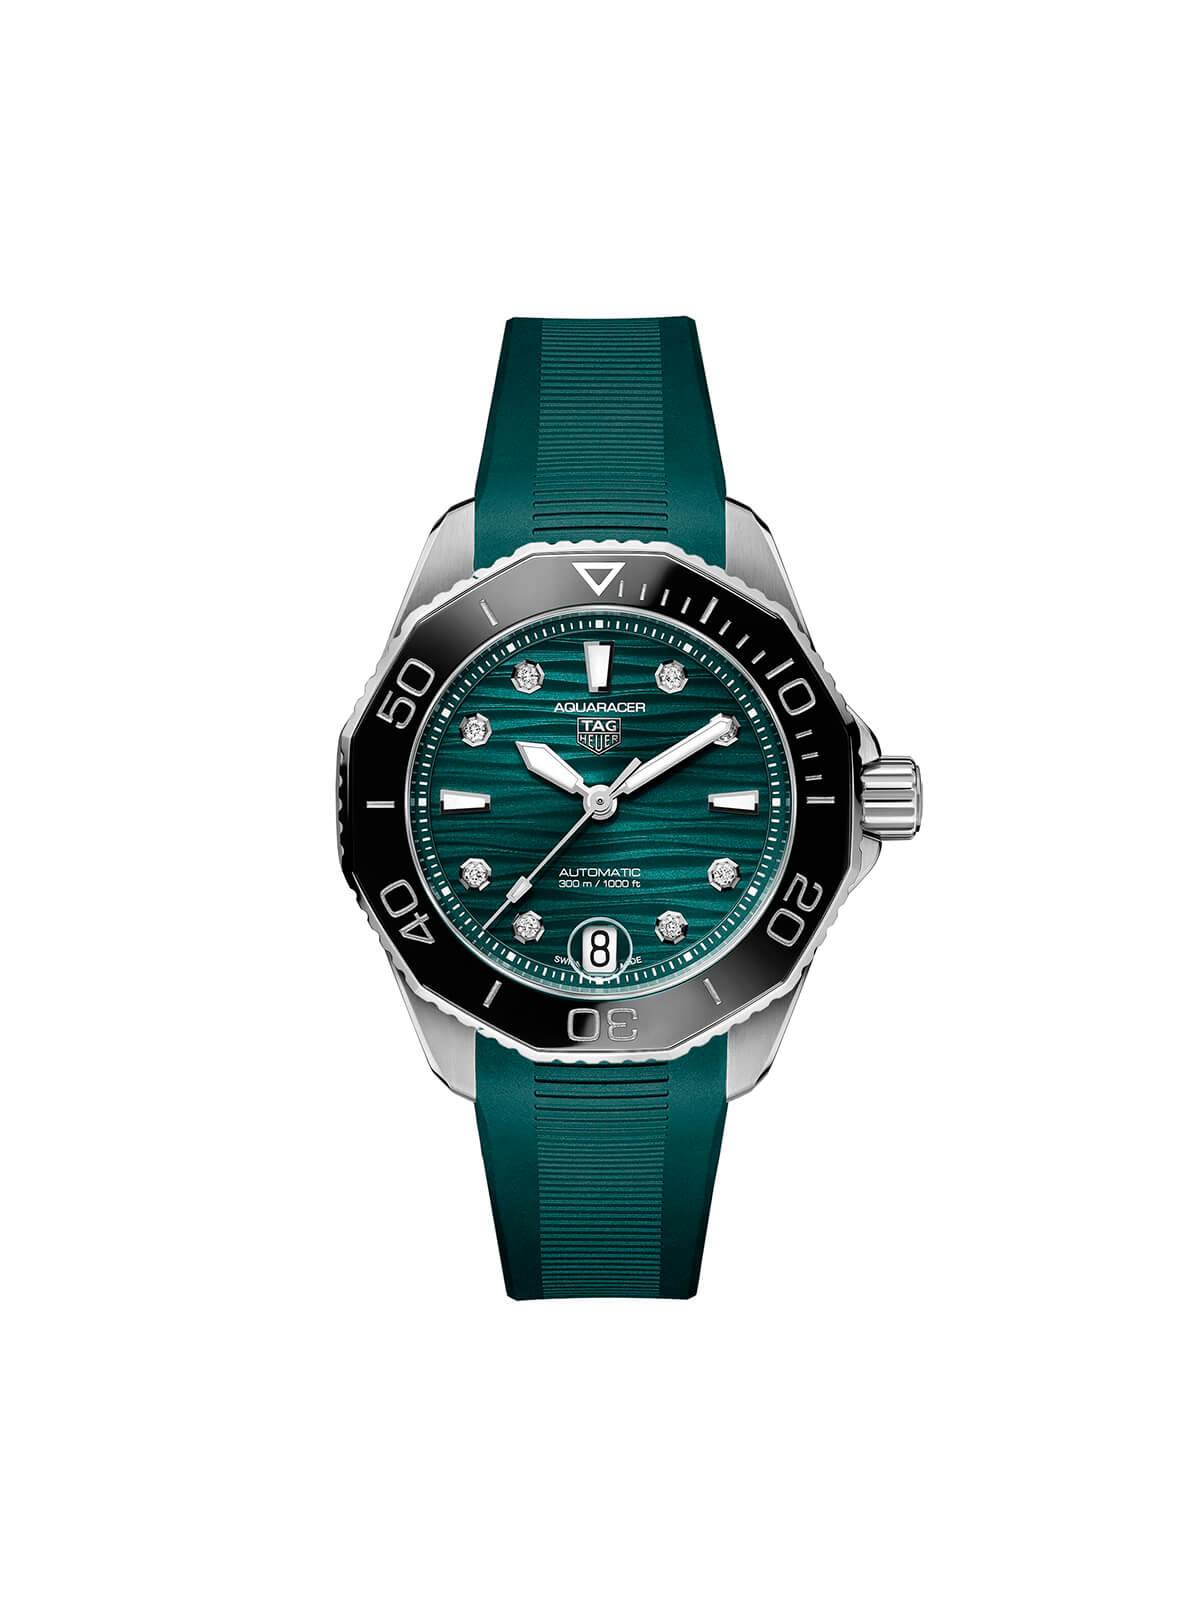 TAG Heuer Aquaracer Professional 300 Date Watch 36mm WBP231G.FT6226